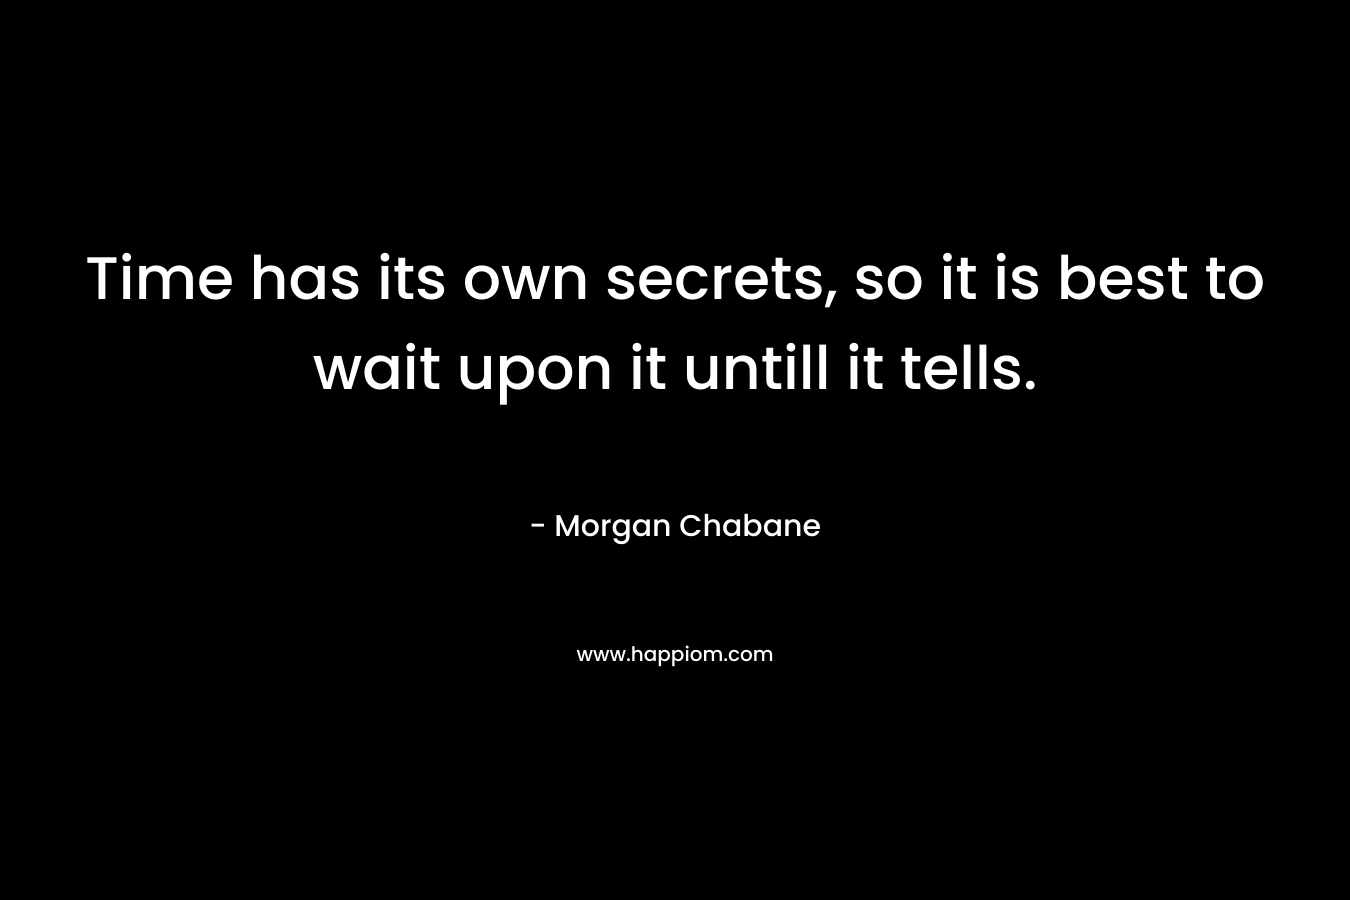 Time has its own secrets, so it is best to wait upon it untill it tells. – Morgan Chabane